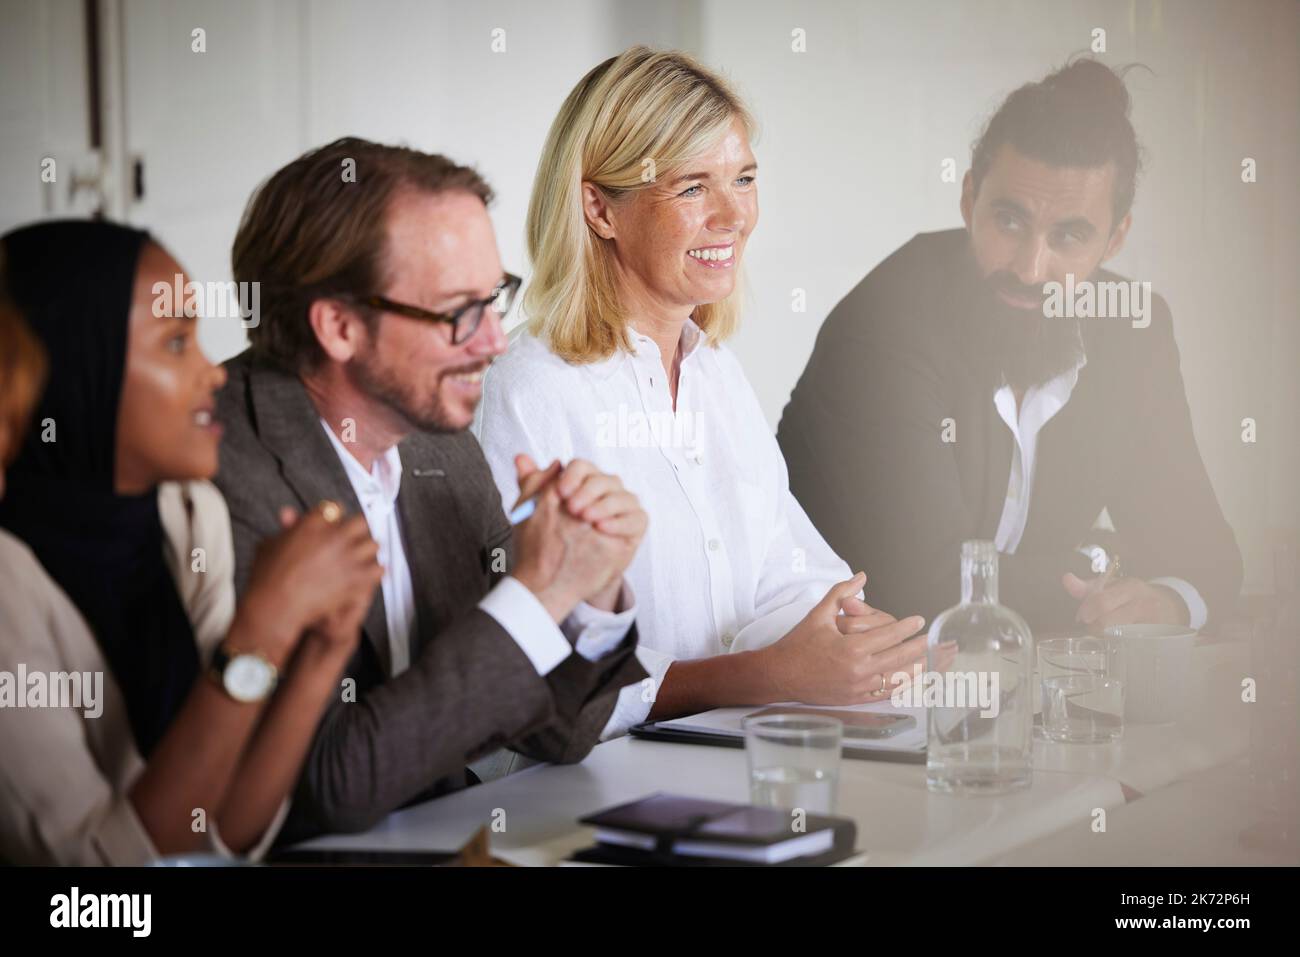 Business people at meeting Stock Photo